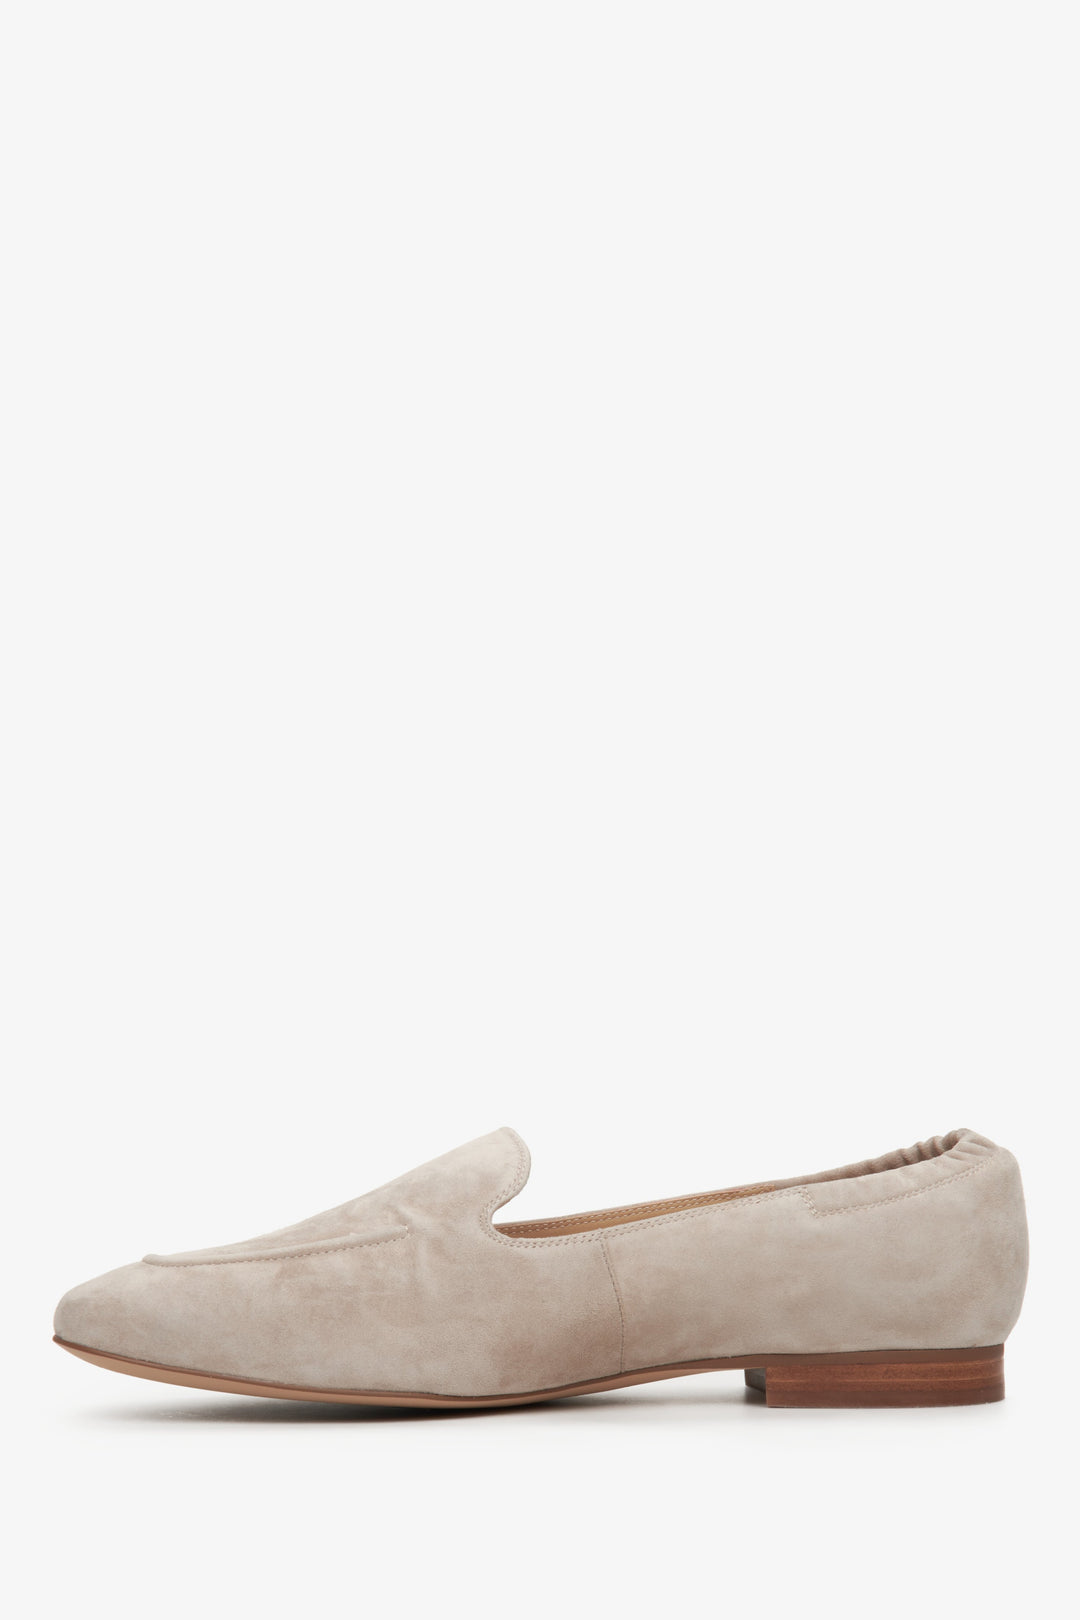 Women's beige Estro moccasins made of genuine velour for spring and fall - shoe profile.